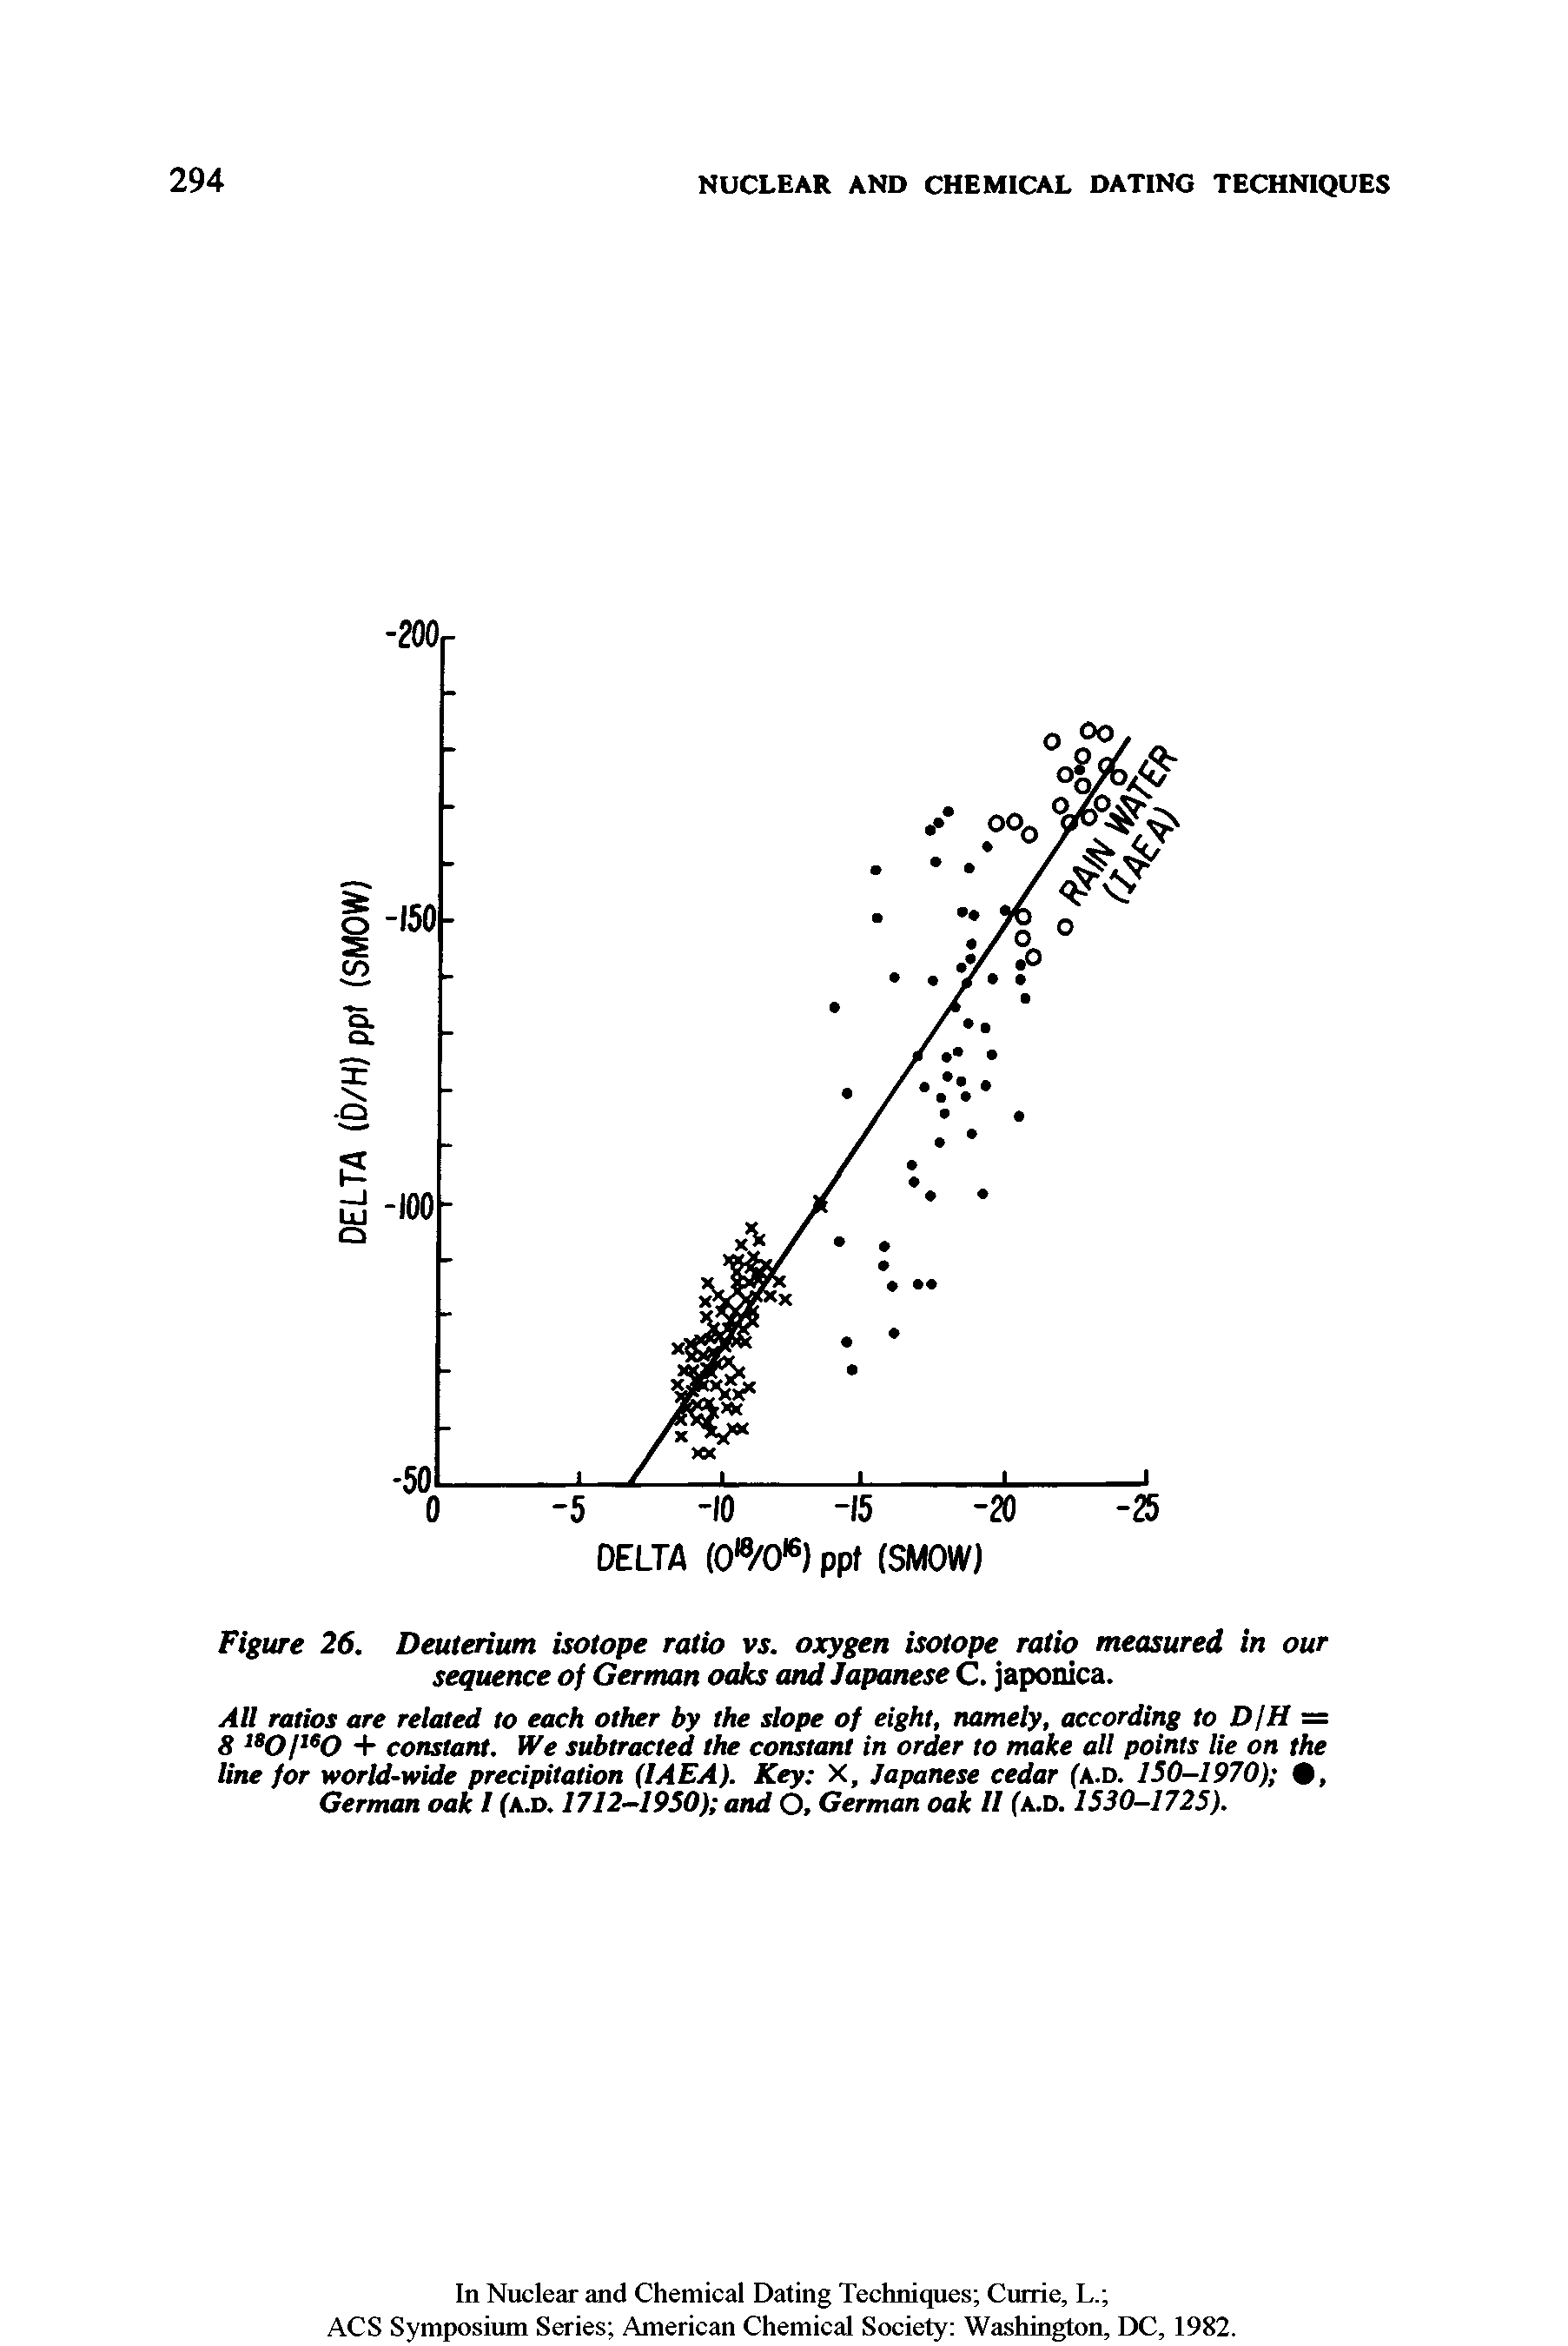 Figure 26. Deuterium isotope ratio vs. oxygen isotope ratio measured in our sequence of German oaks and Japanese C. japonica.